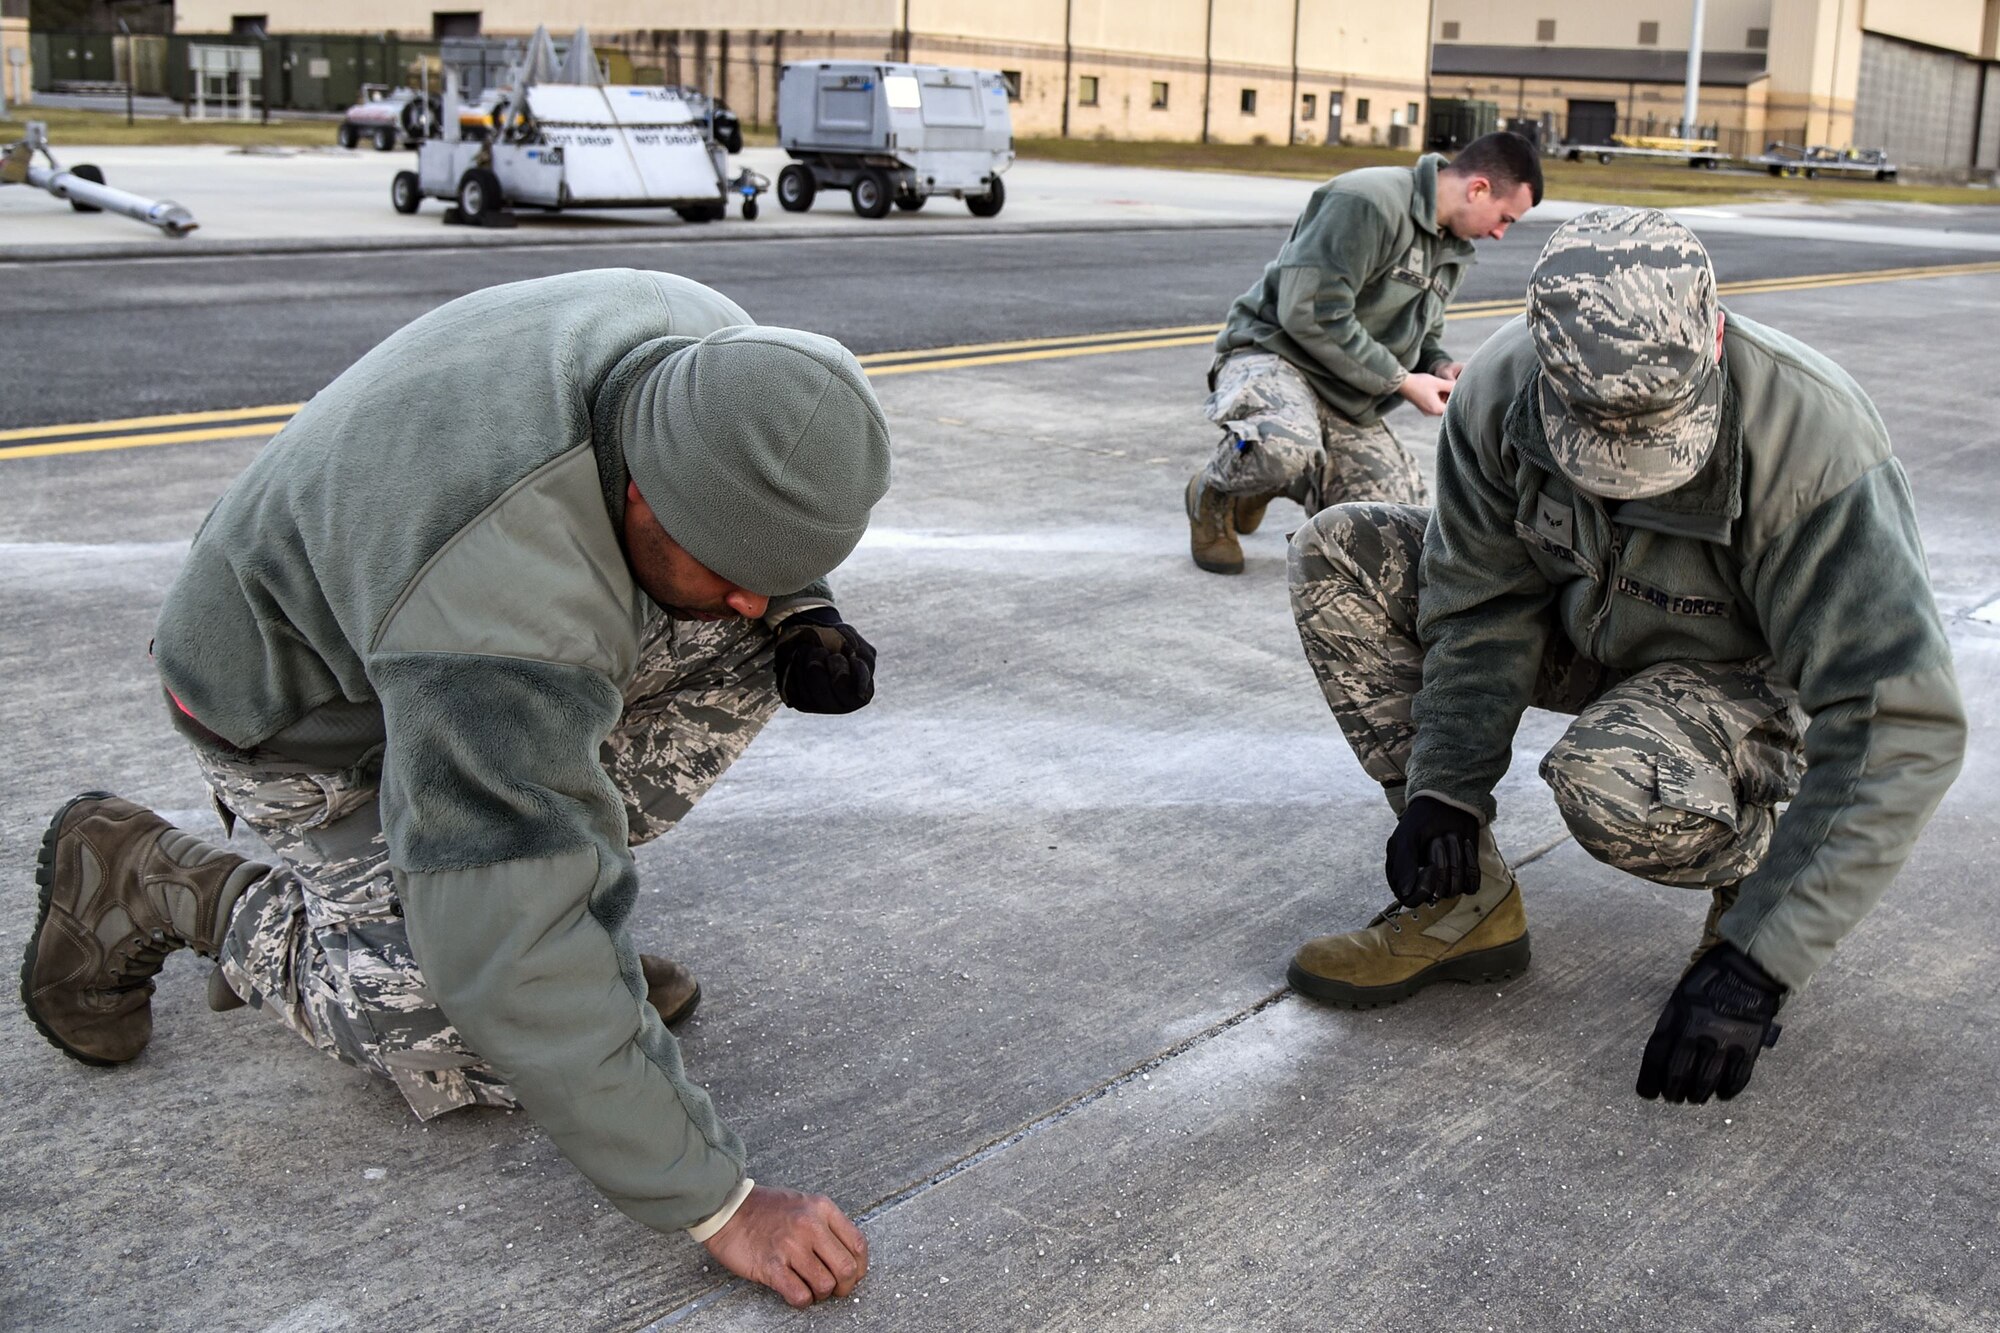 Team Moody Airmen grab debris off of the flight line during a foreign object debris (FOD) walk, Jan. 2, 2018, at Moody Air Force Base, Ga. The FOD walk was performed following the winter holidays to remove any debris that could potentially cause damage to aircraft or vehicles. (U.S. Air Force photo by Airman Eugene Oliver)